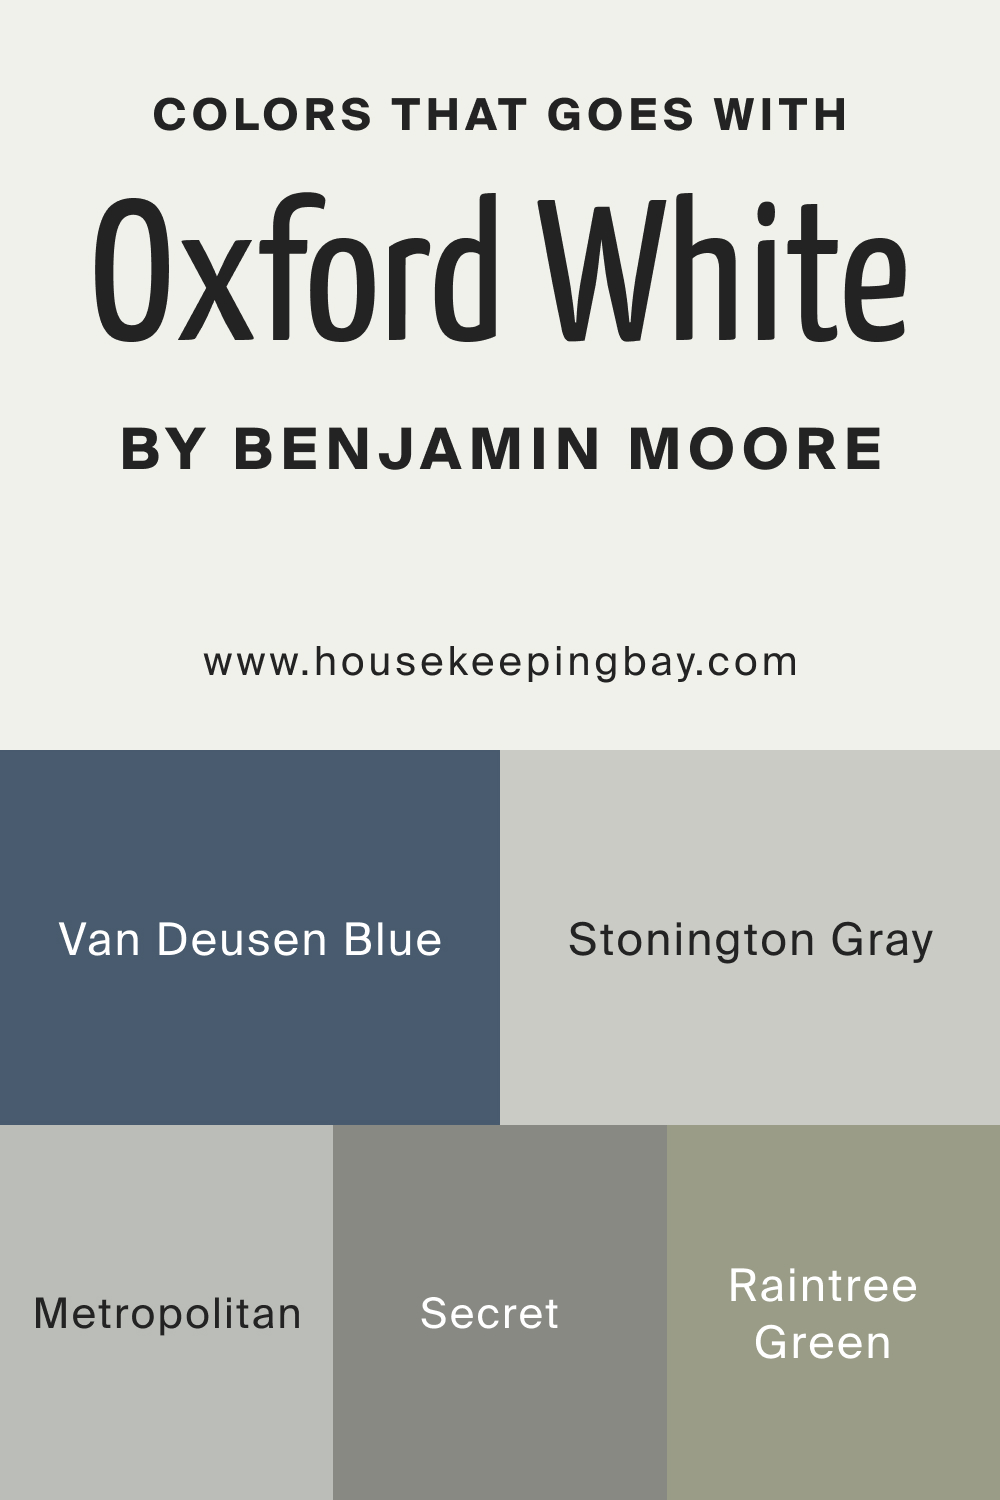 Colors that goes with Oxford White CC 30 by Benjamin Moore